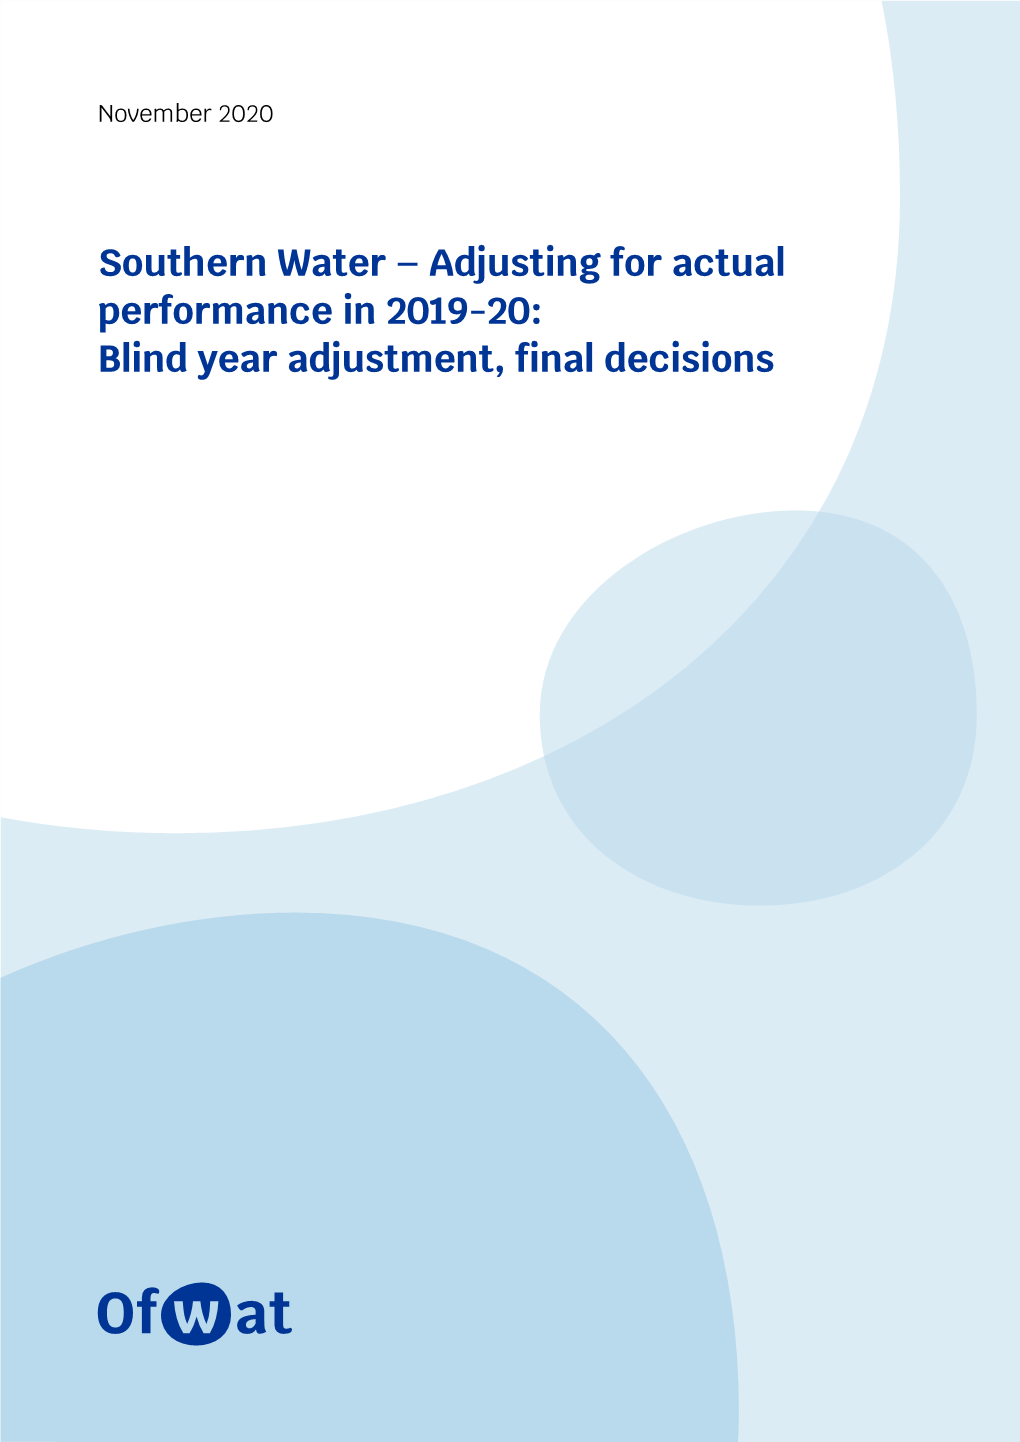 Southern Water – Adjusting for Actual Performance in 2019-20: Blind Year Adjustment, Final Decisions Blind Year Adjustments, Final Decision, Southern Water